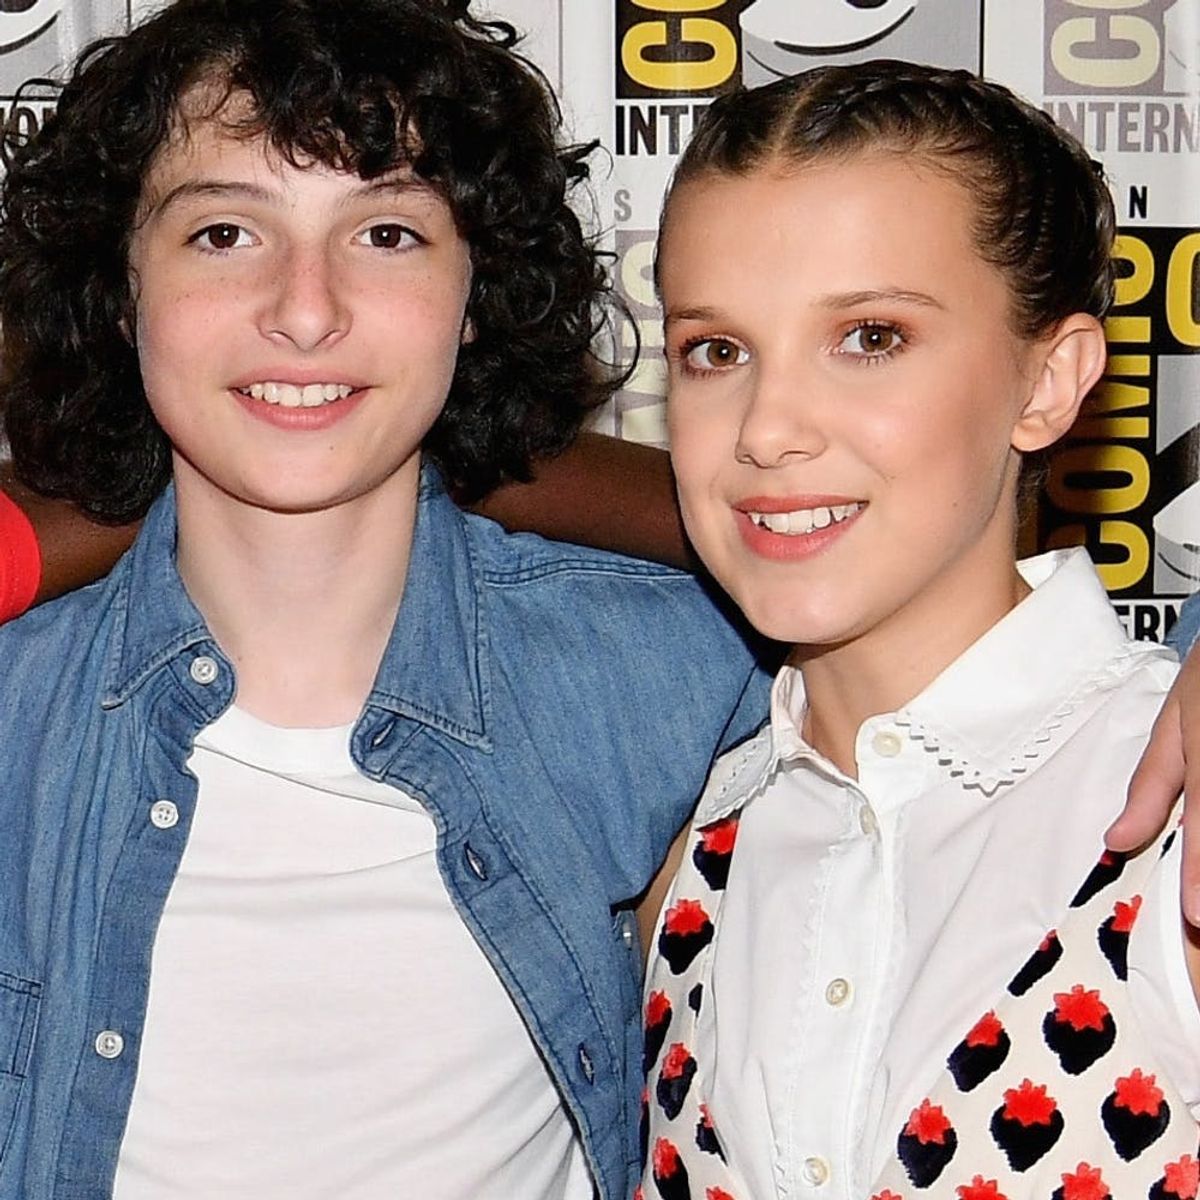 Millie Bobby Brown Reveals the Sweet Words Co-Star Finn Wolfhard Whispered to Her Before Their Second Season Kiss